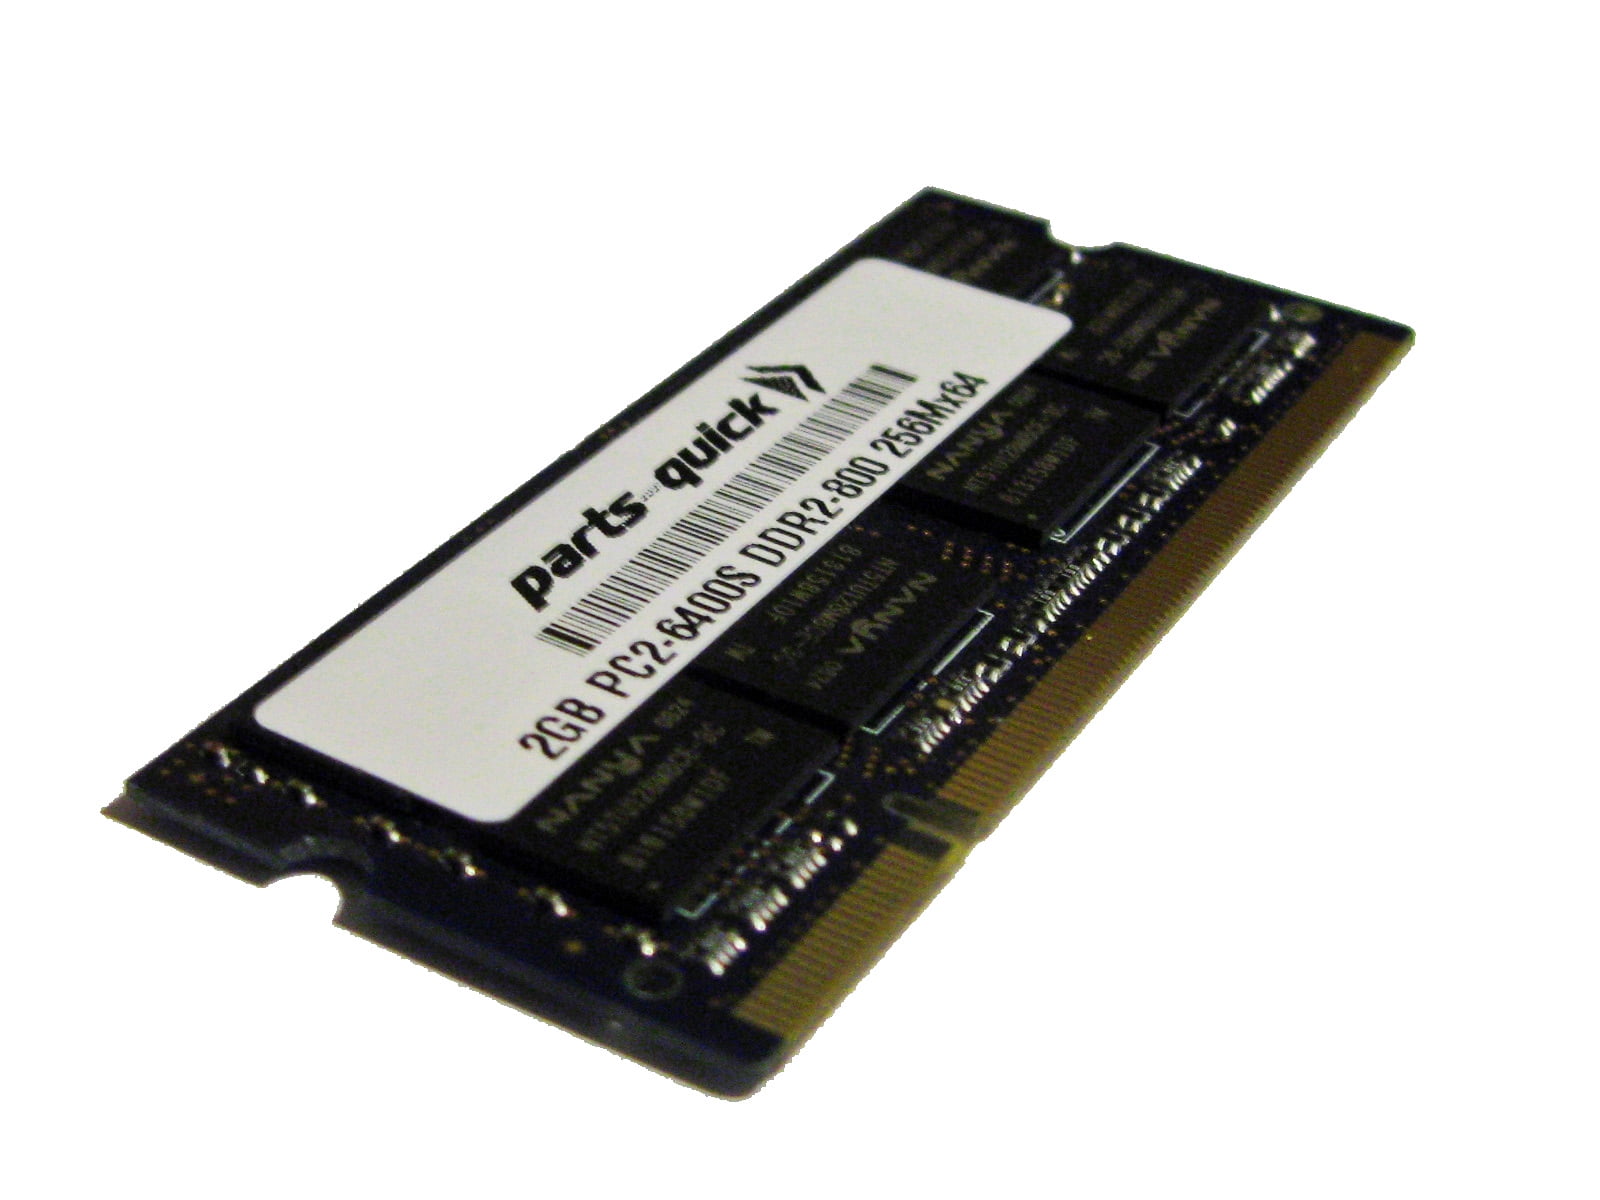 parts-quick 4GB Memory for Sony VAIO VGN-NW160J/S DDR2 PC2-6400 800MHz SODIMM Compatible RAM